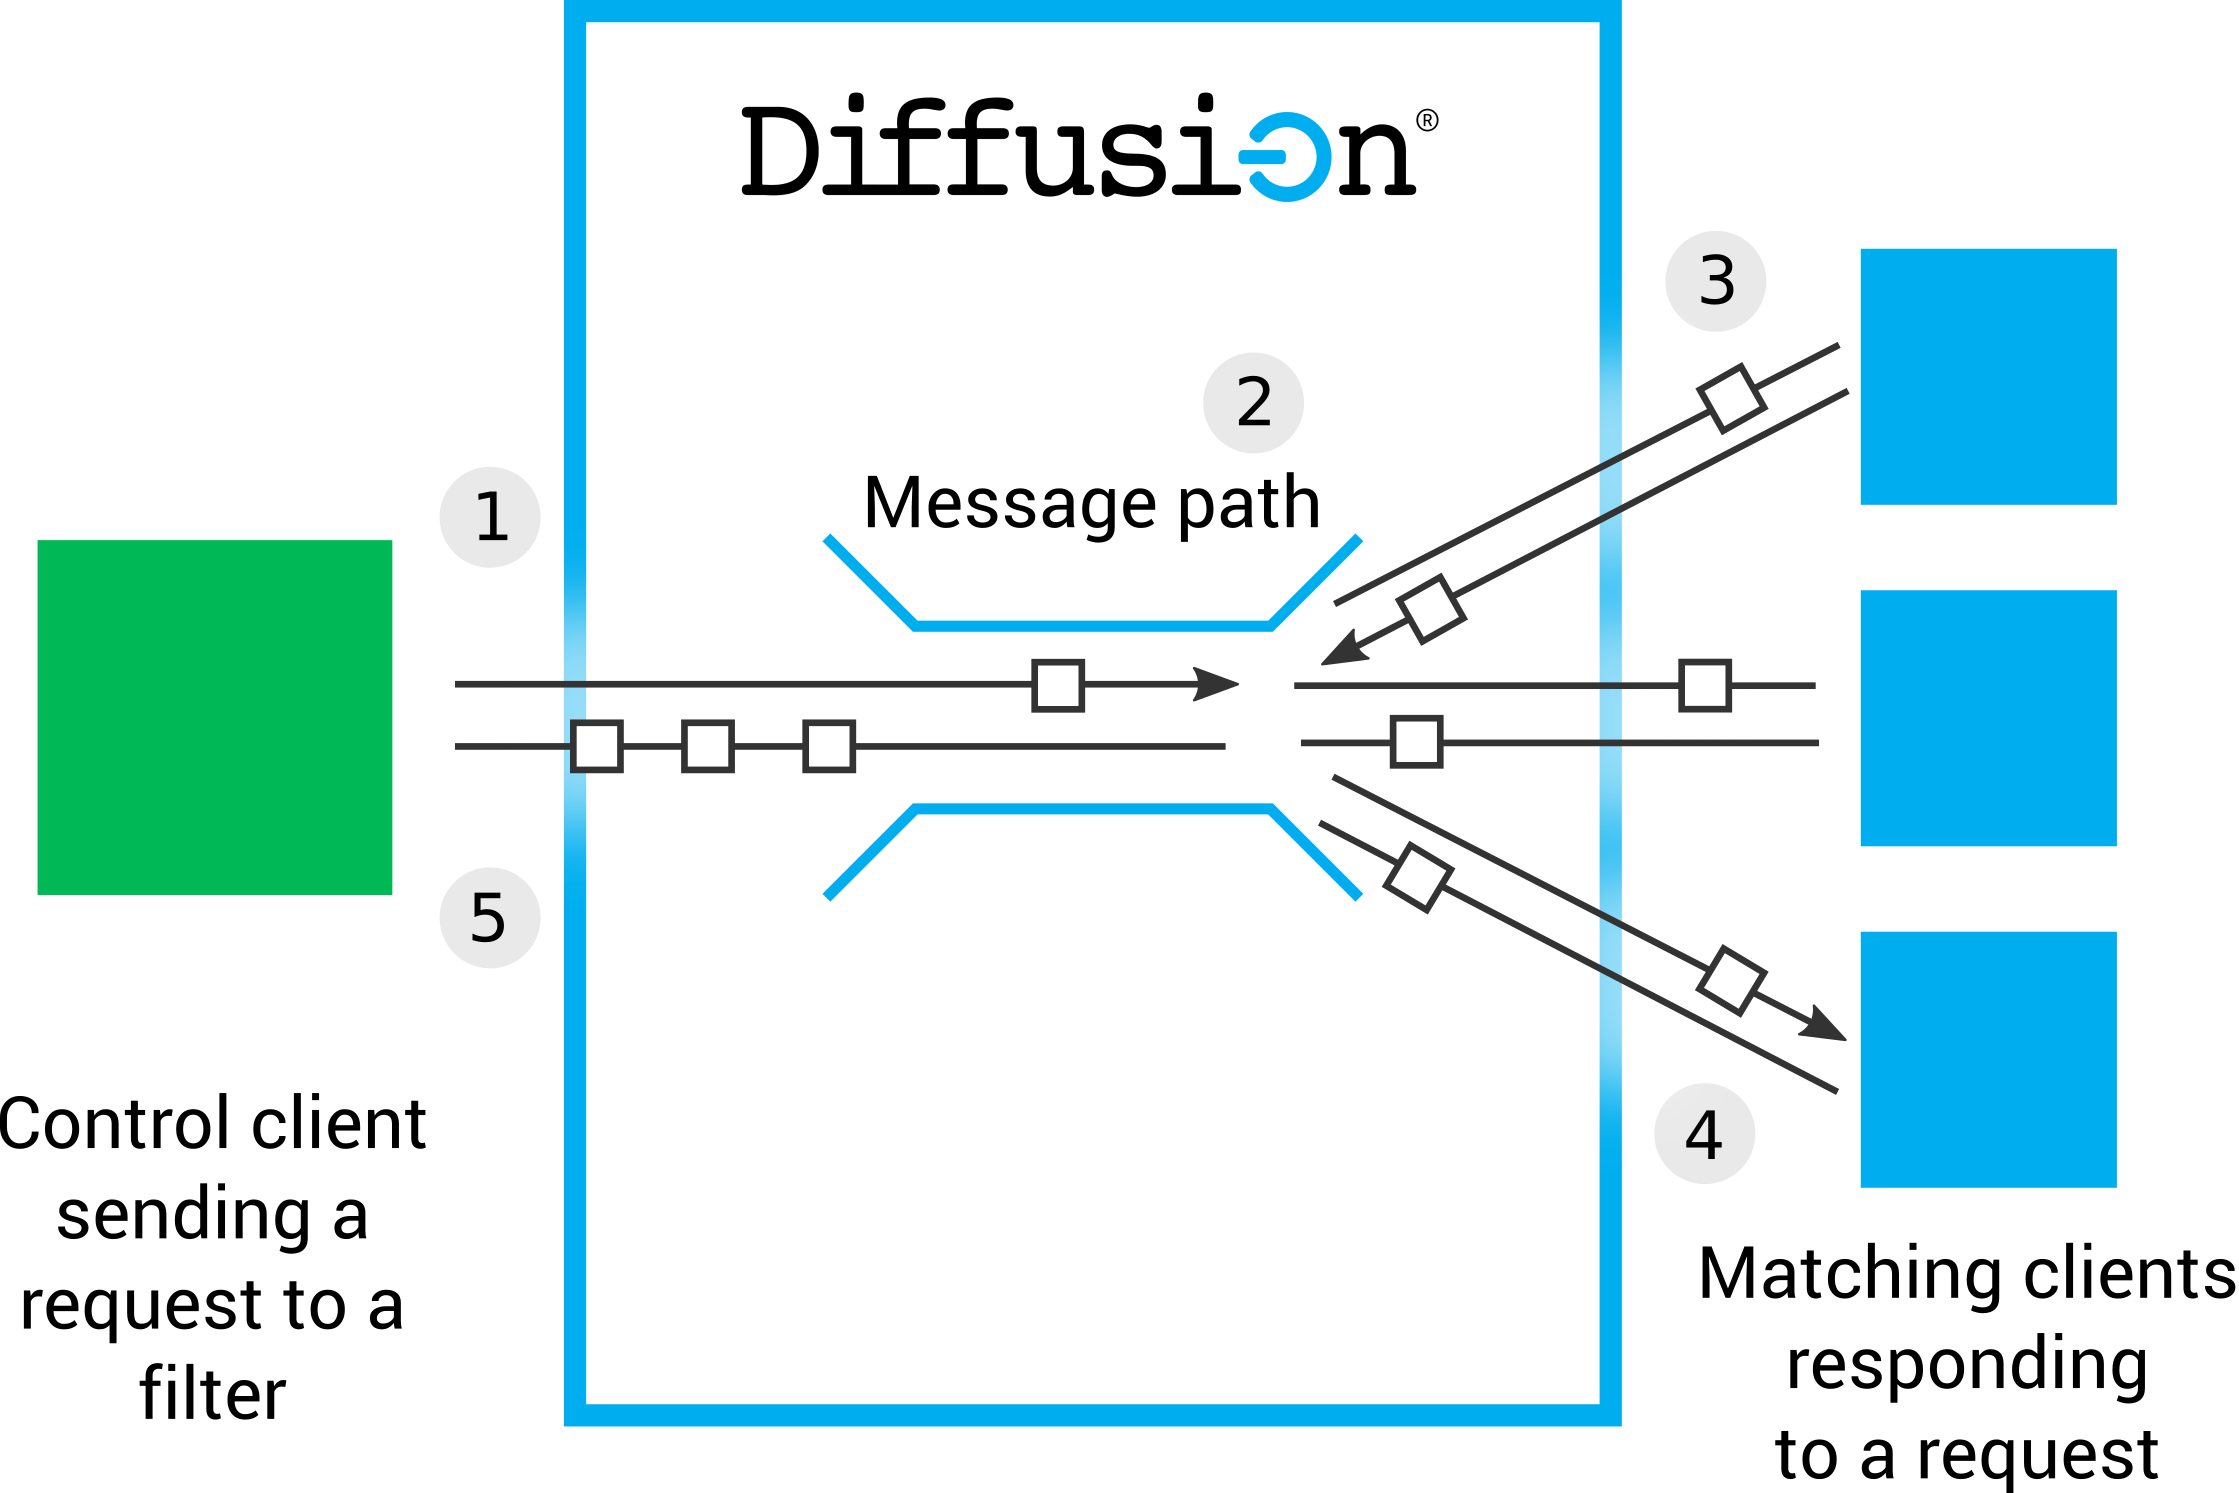 A control client session on the left. Diffusion in the centre. A set of client sessions that match the specified filter on the right. An arrow representing the request message goes from the control client session through a shape representing the message path inside the Diffusion server. This arrow splits into many as Diffusion sends the request on to all client sessions specified by the filter. Arrows representing the response messages go from each of the receiving client sessions back to the Diffusion server where they are send on to the control client session.